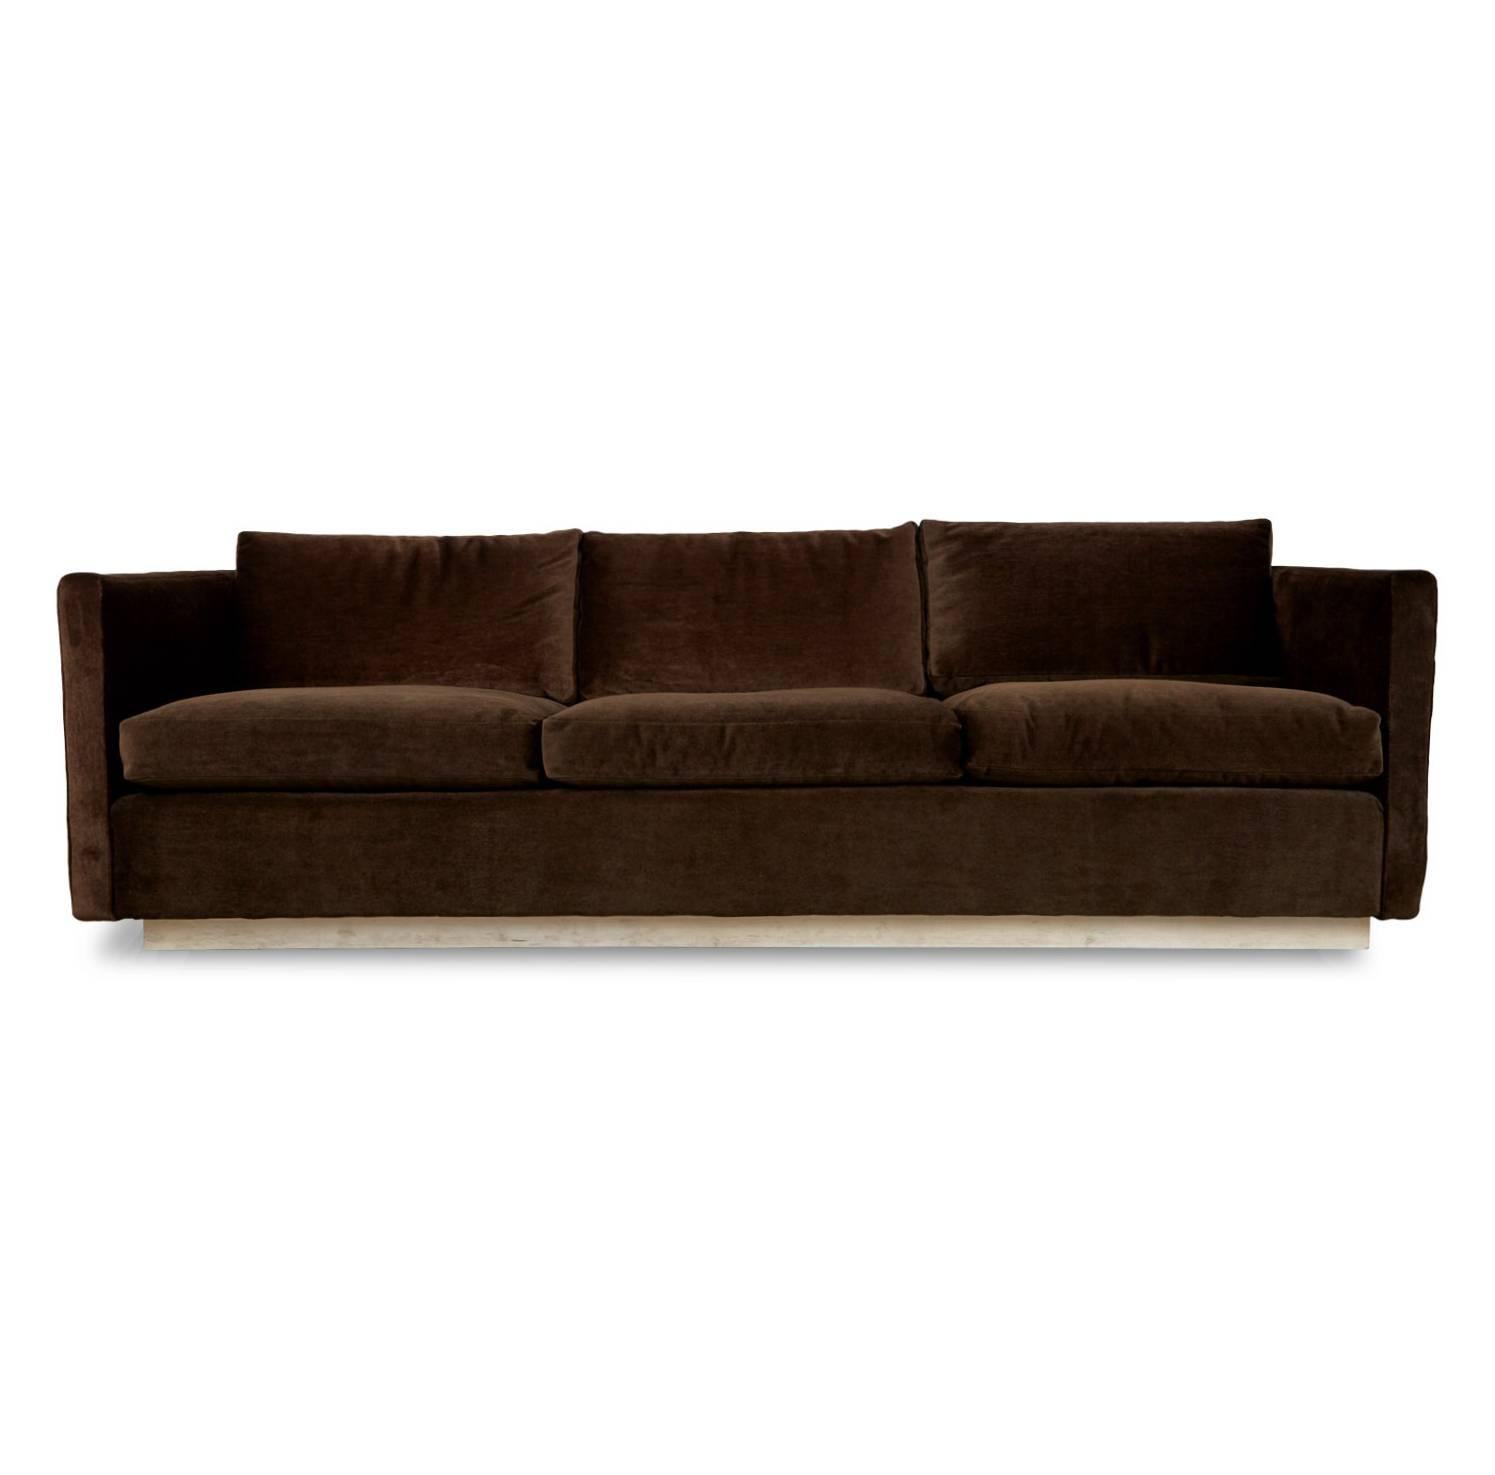 Wonderfully plush sofa attributed to Milo Baughman that has been recently restored and upholstered in a sumptuous rich chocolate brown mohair. This elegant sofa features clean lines, minimal design and a white base that contrasts with the fabric